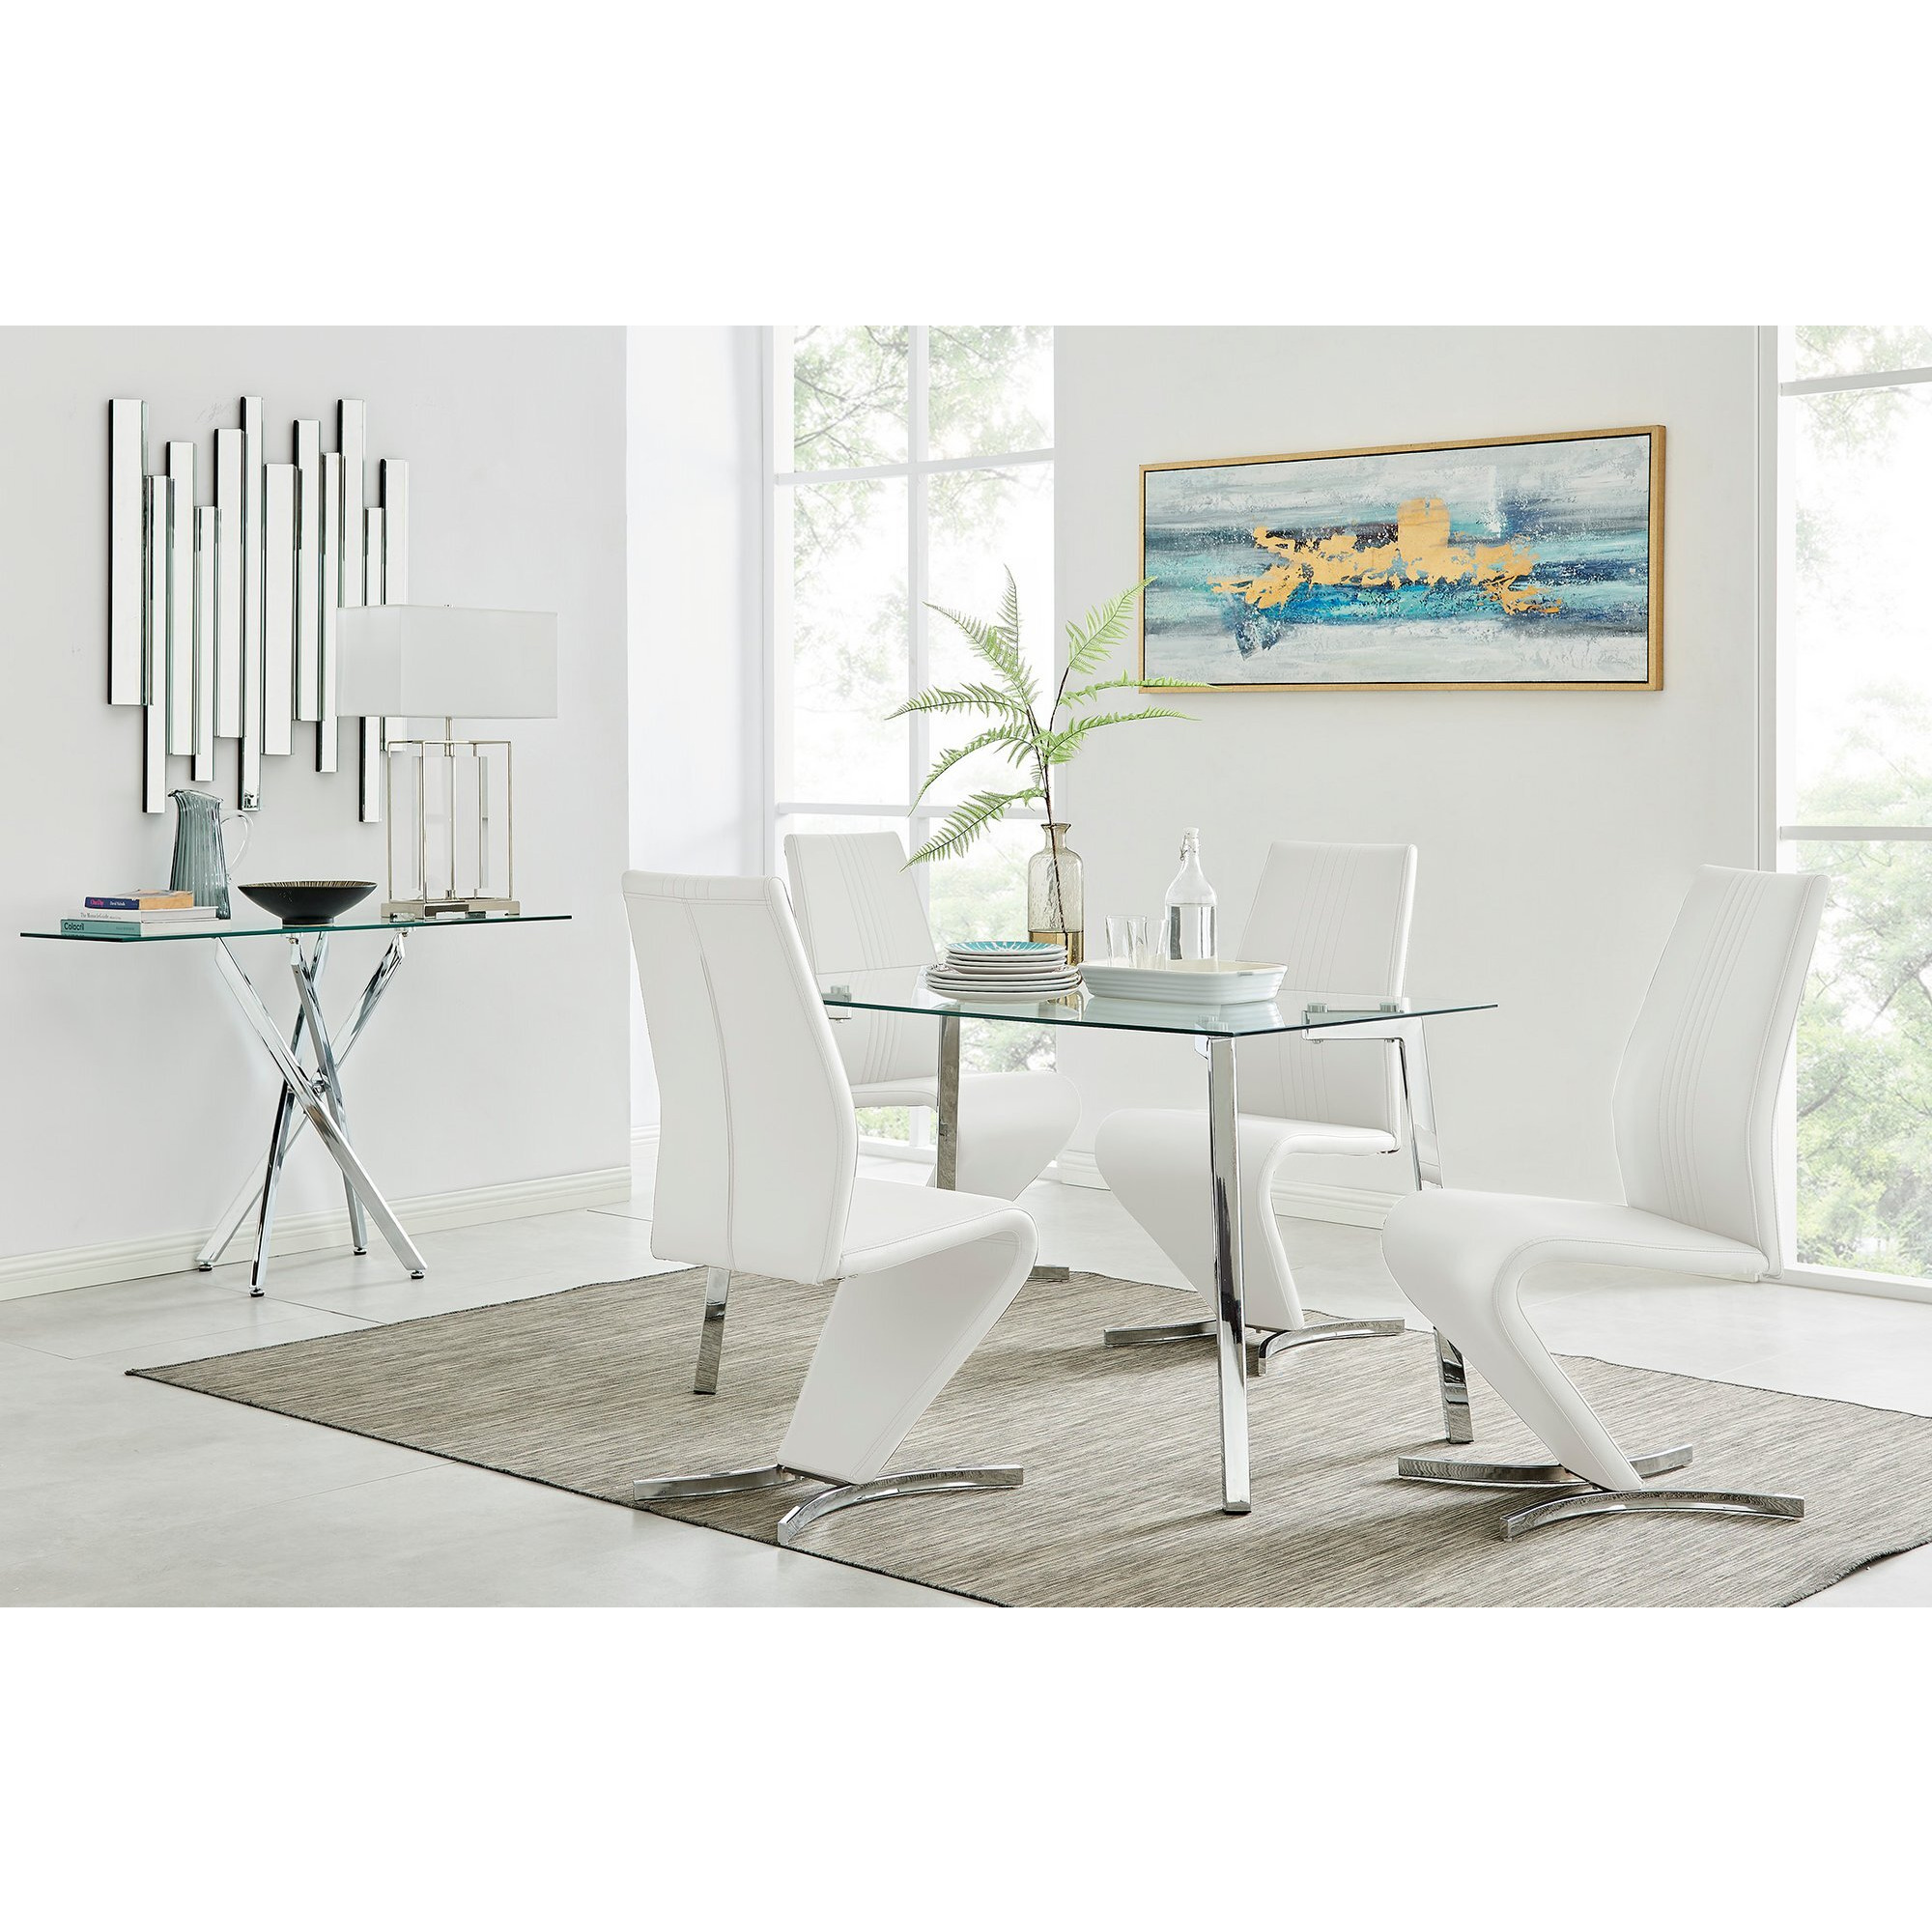 Cosmo Chrome Glass Dining Table And 4 Willow Dining Chairs Set